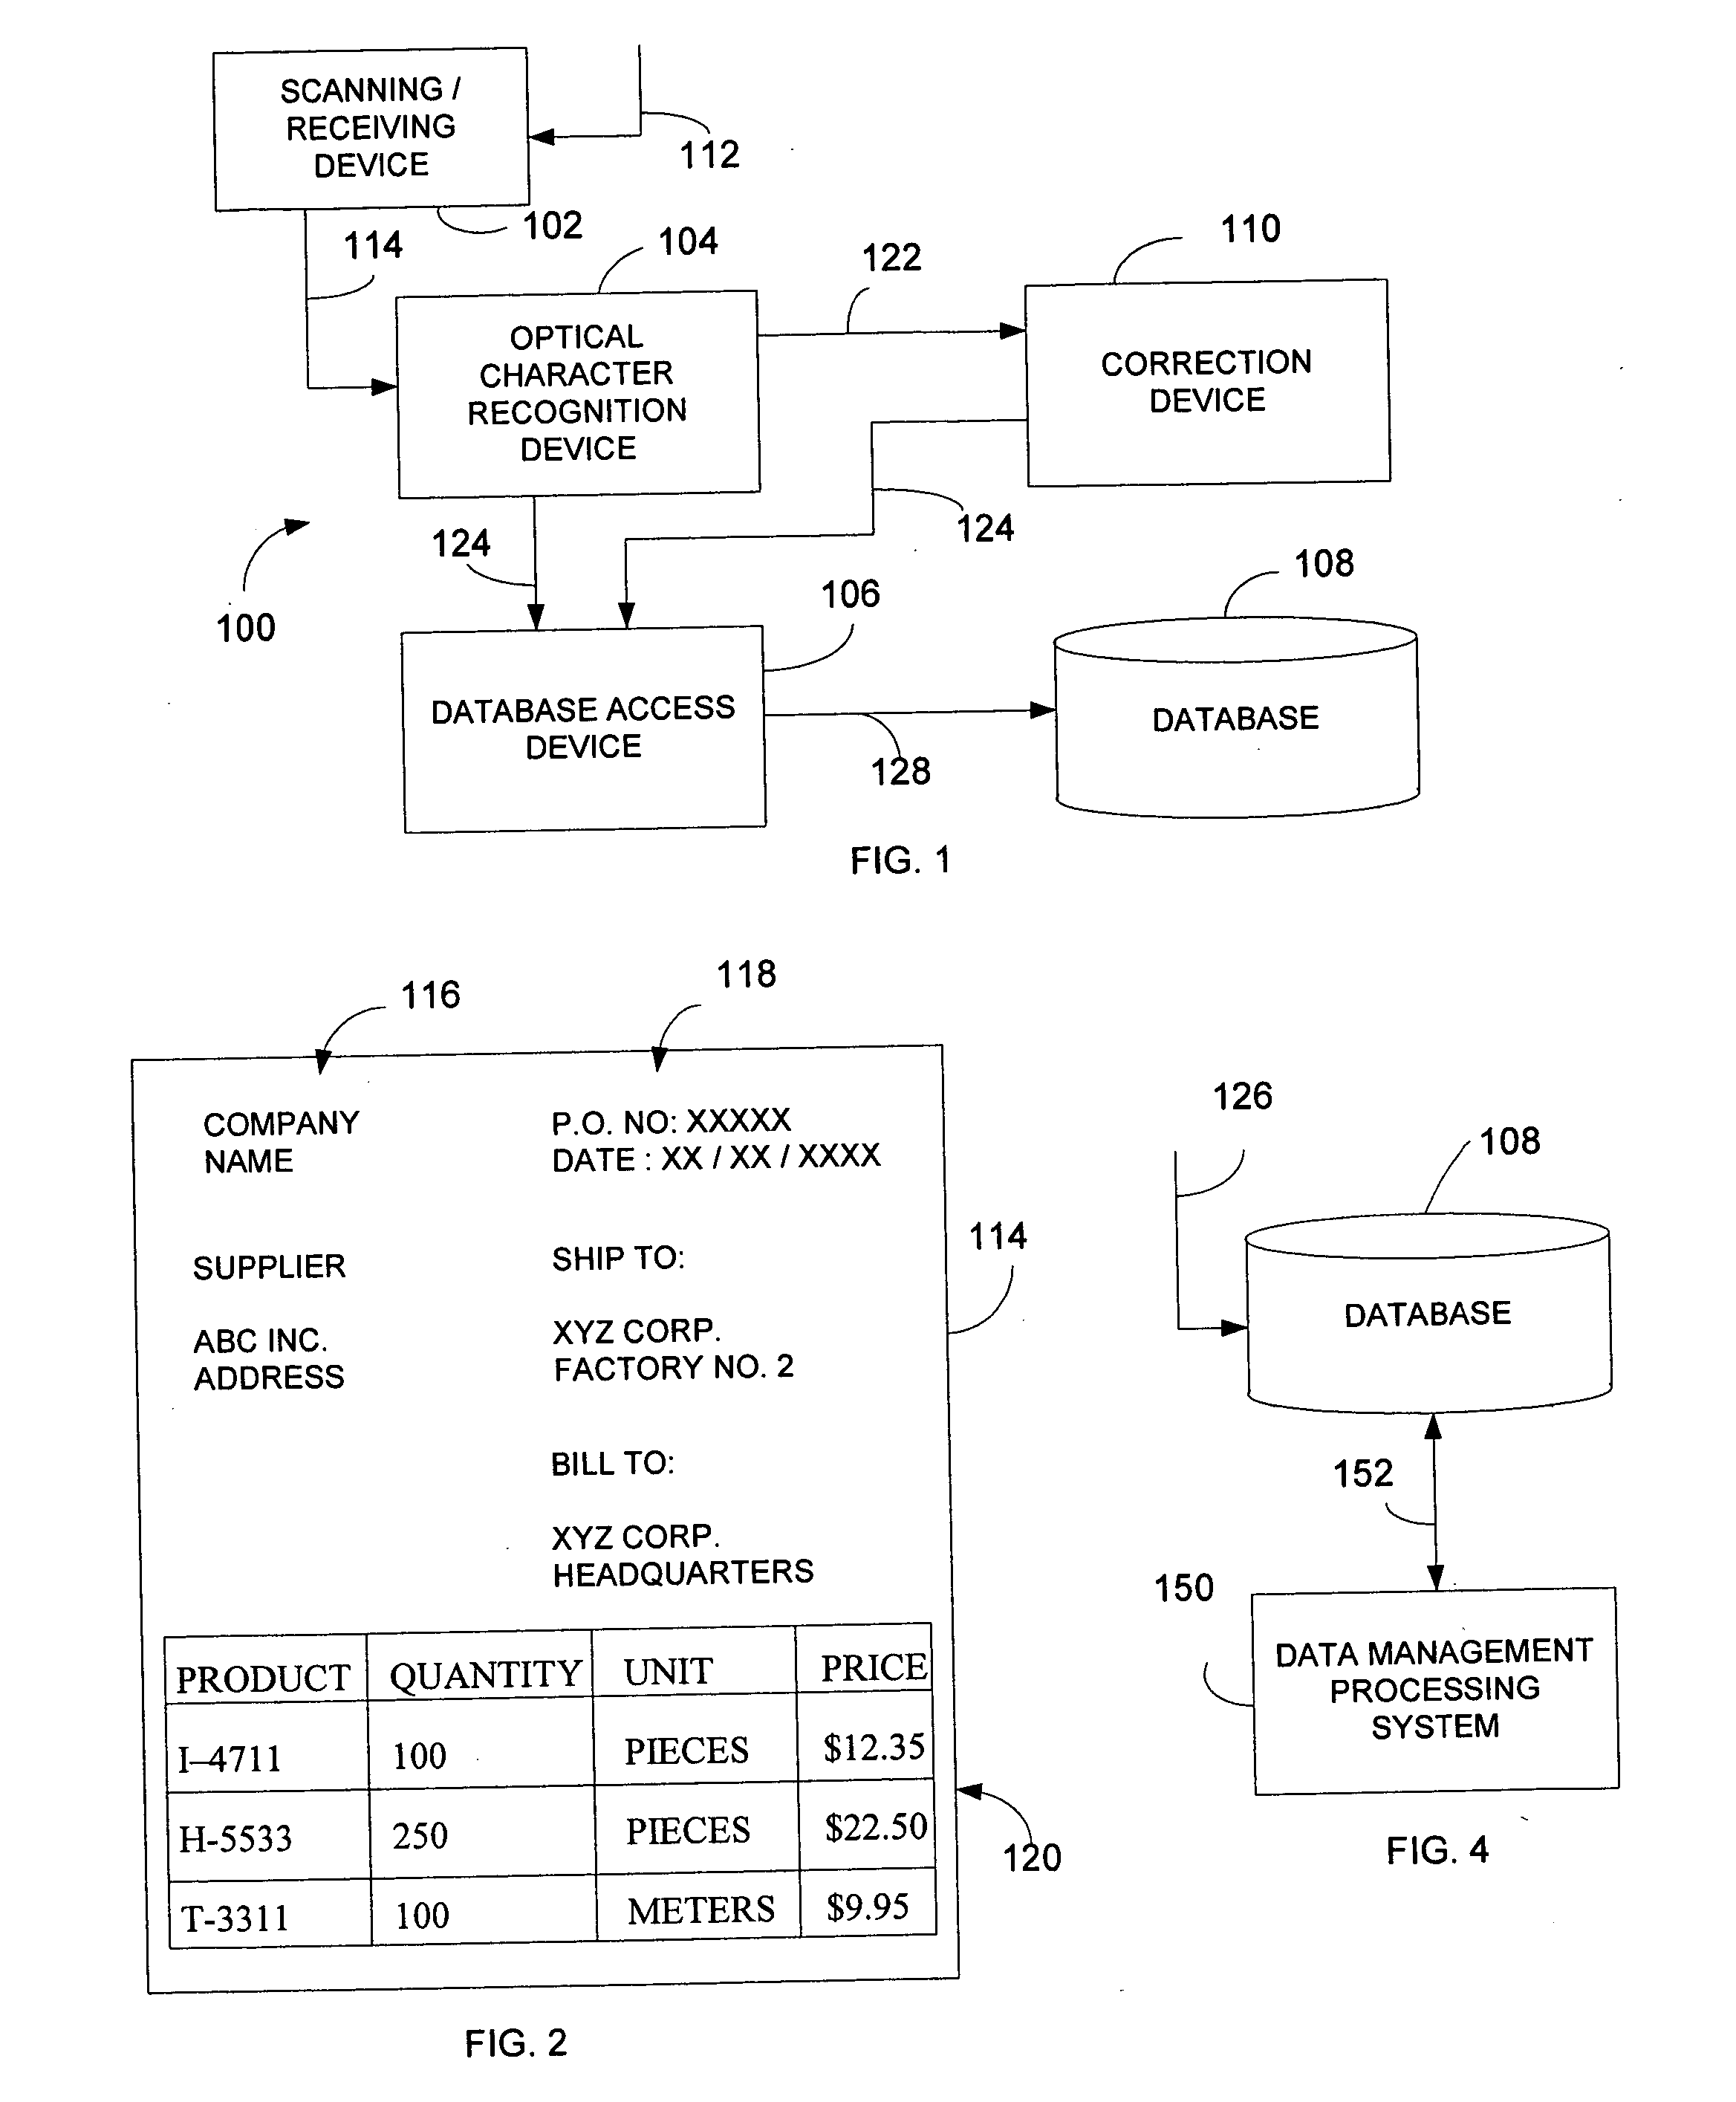 Automated data processing using optical character recognition